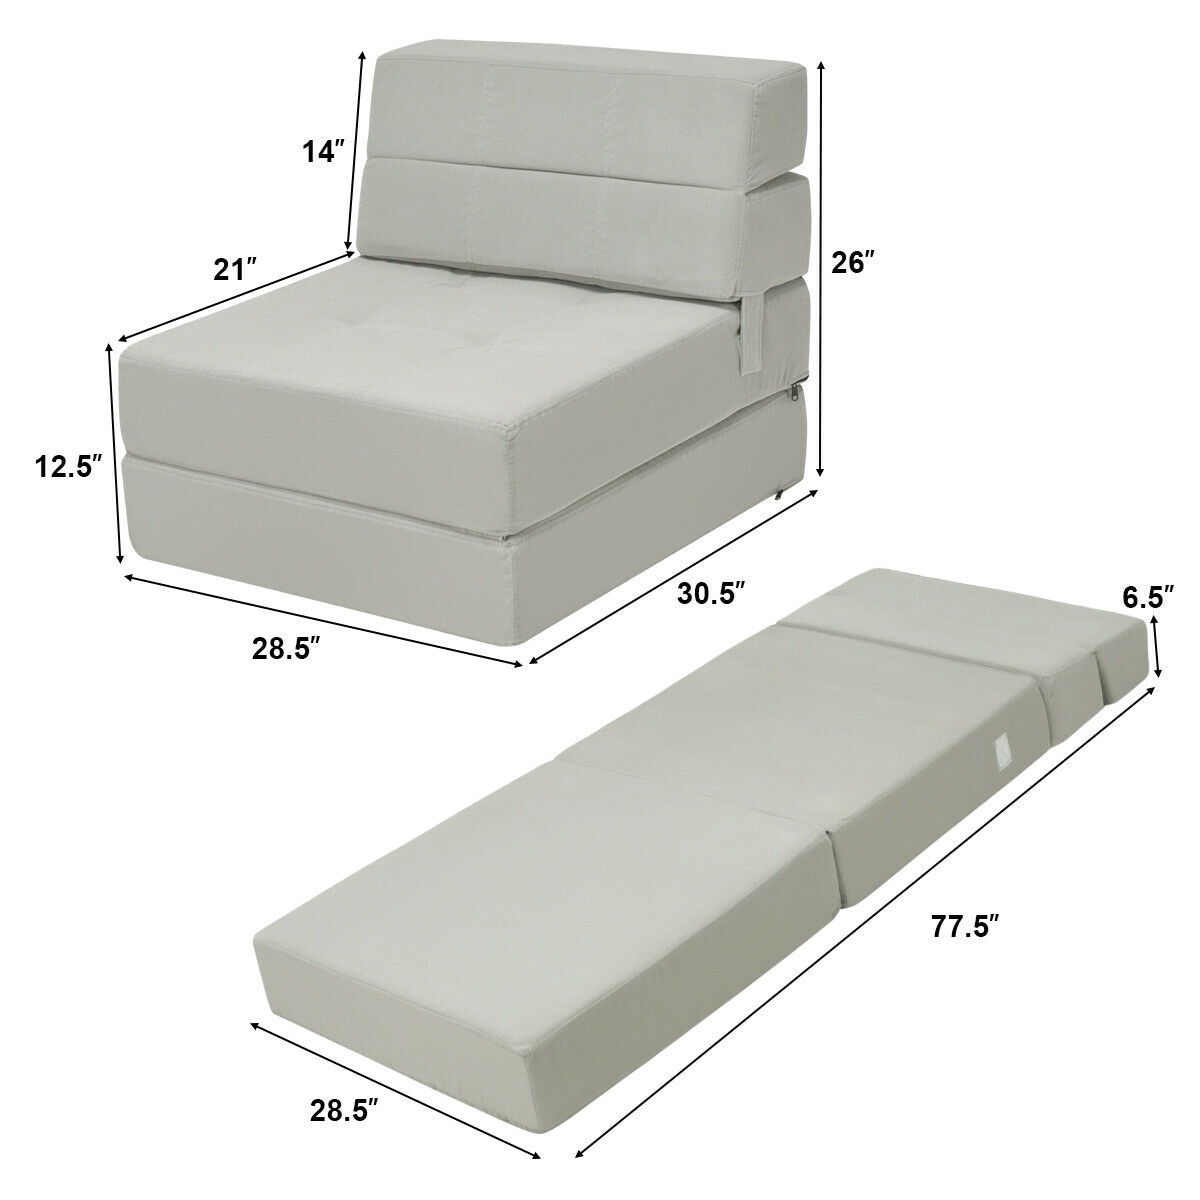 Costway Tri Fold Fold Down Chair Flip Out Lounger Convertible Sleeper Overstock 23578689